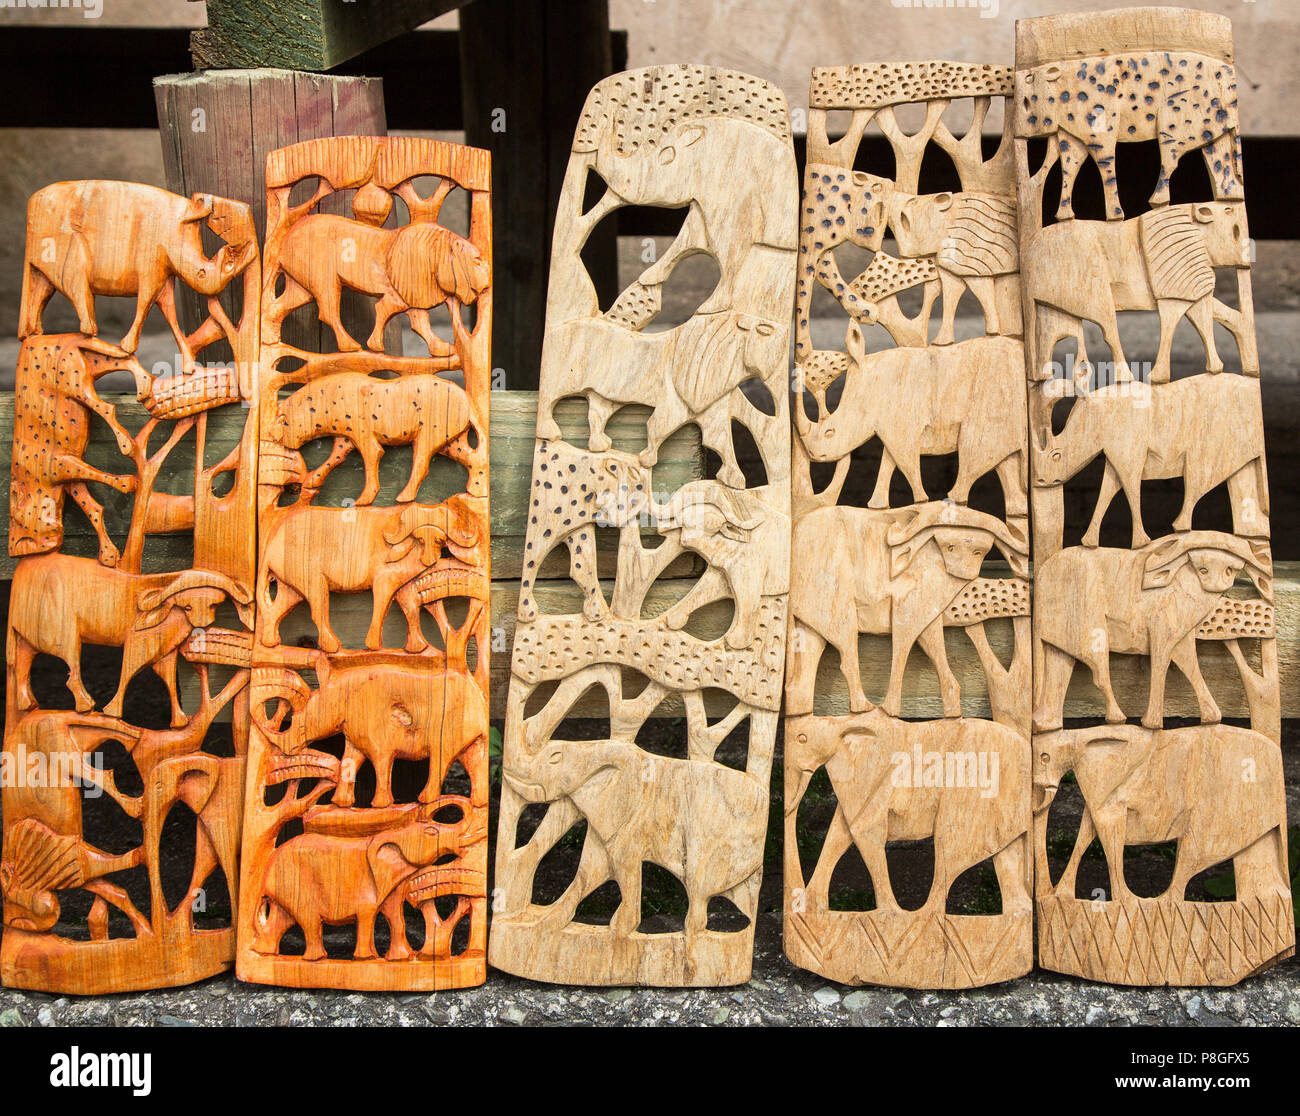 African tribal art of the big five animals of South Africa, for sale at a market stall. This artwork is generic and widely available across markets in Stock Photo